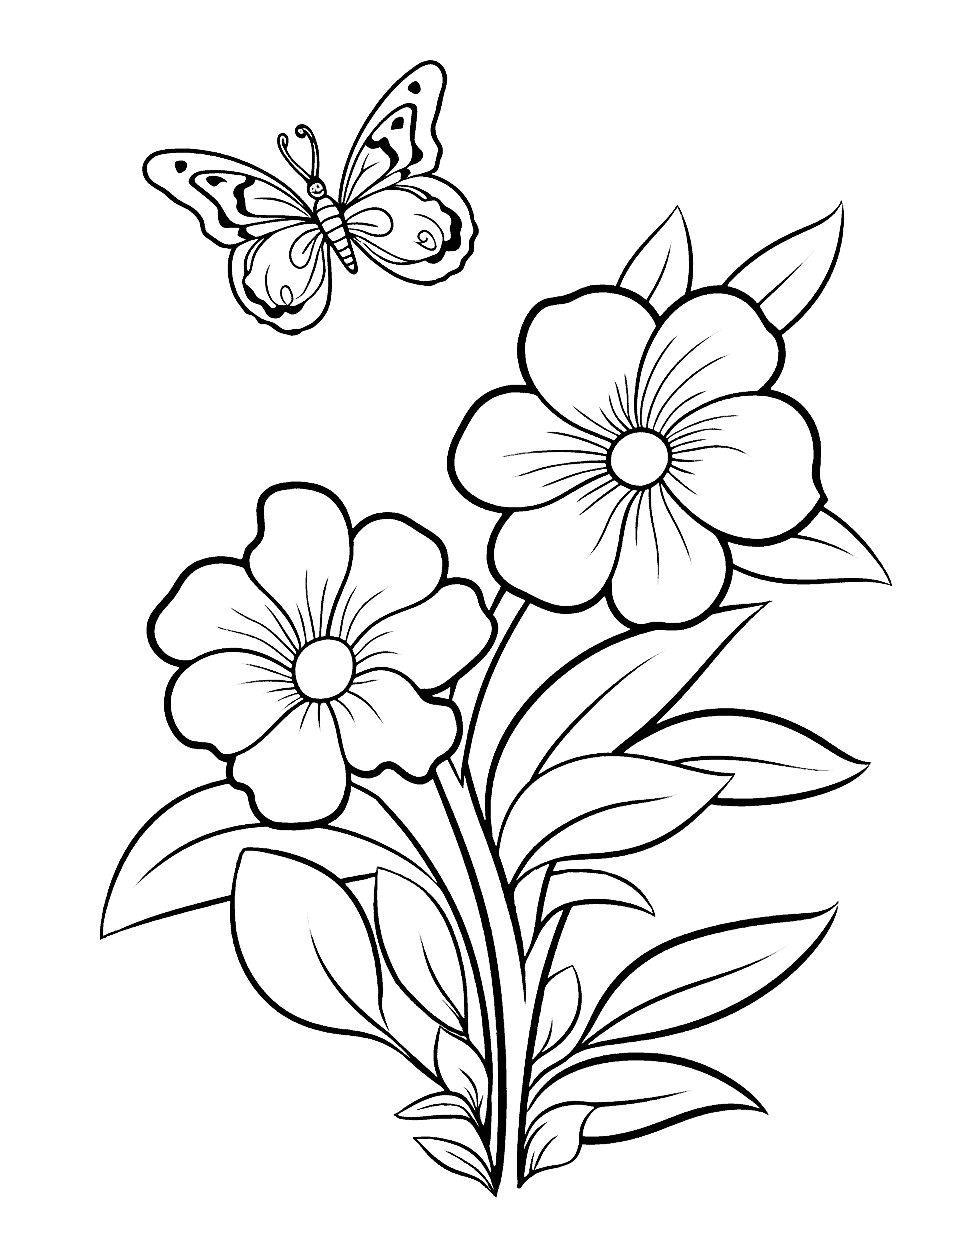 Flower coloring pages free printable sheets